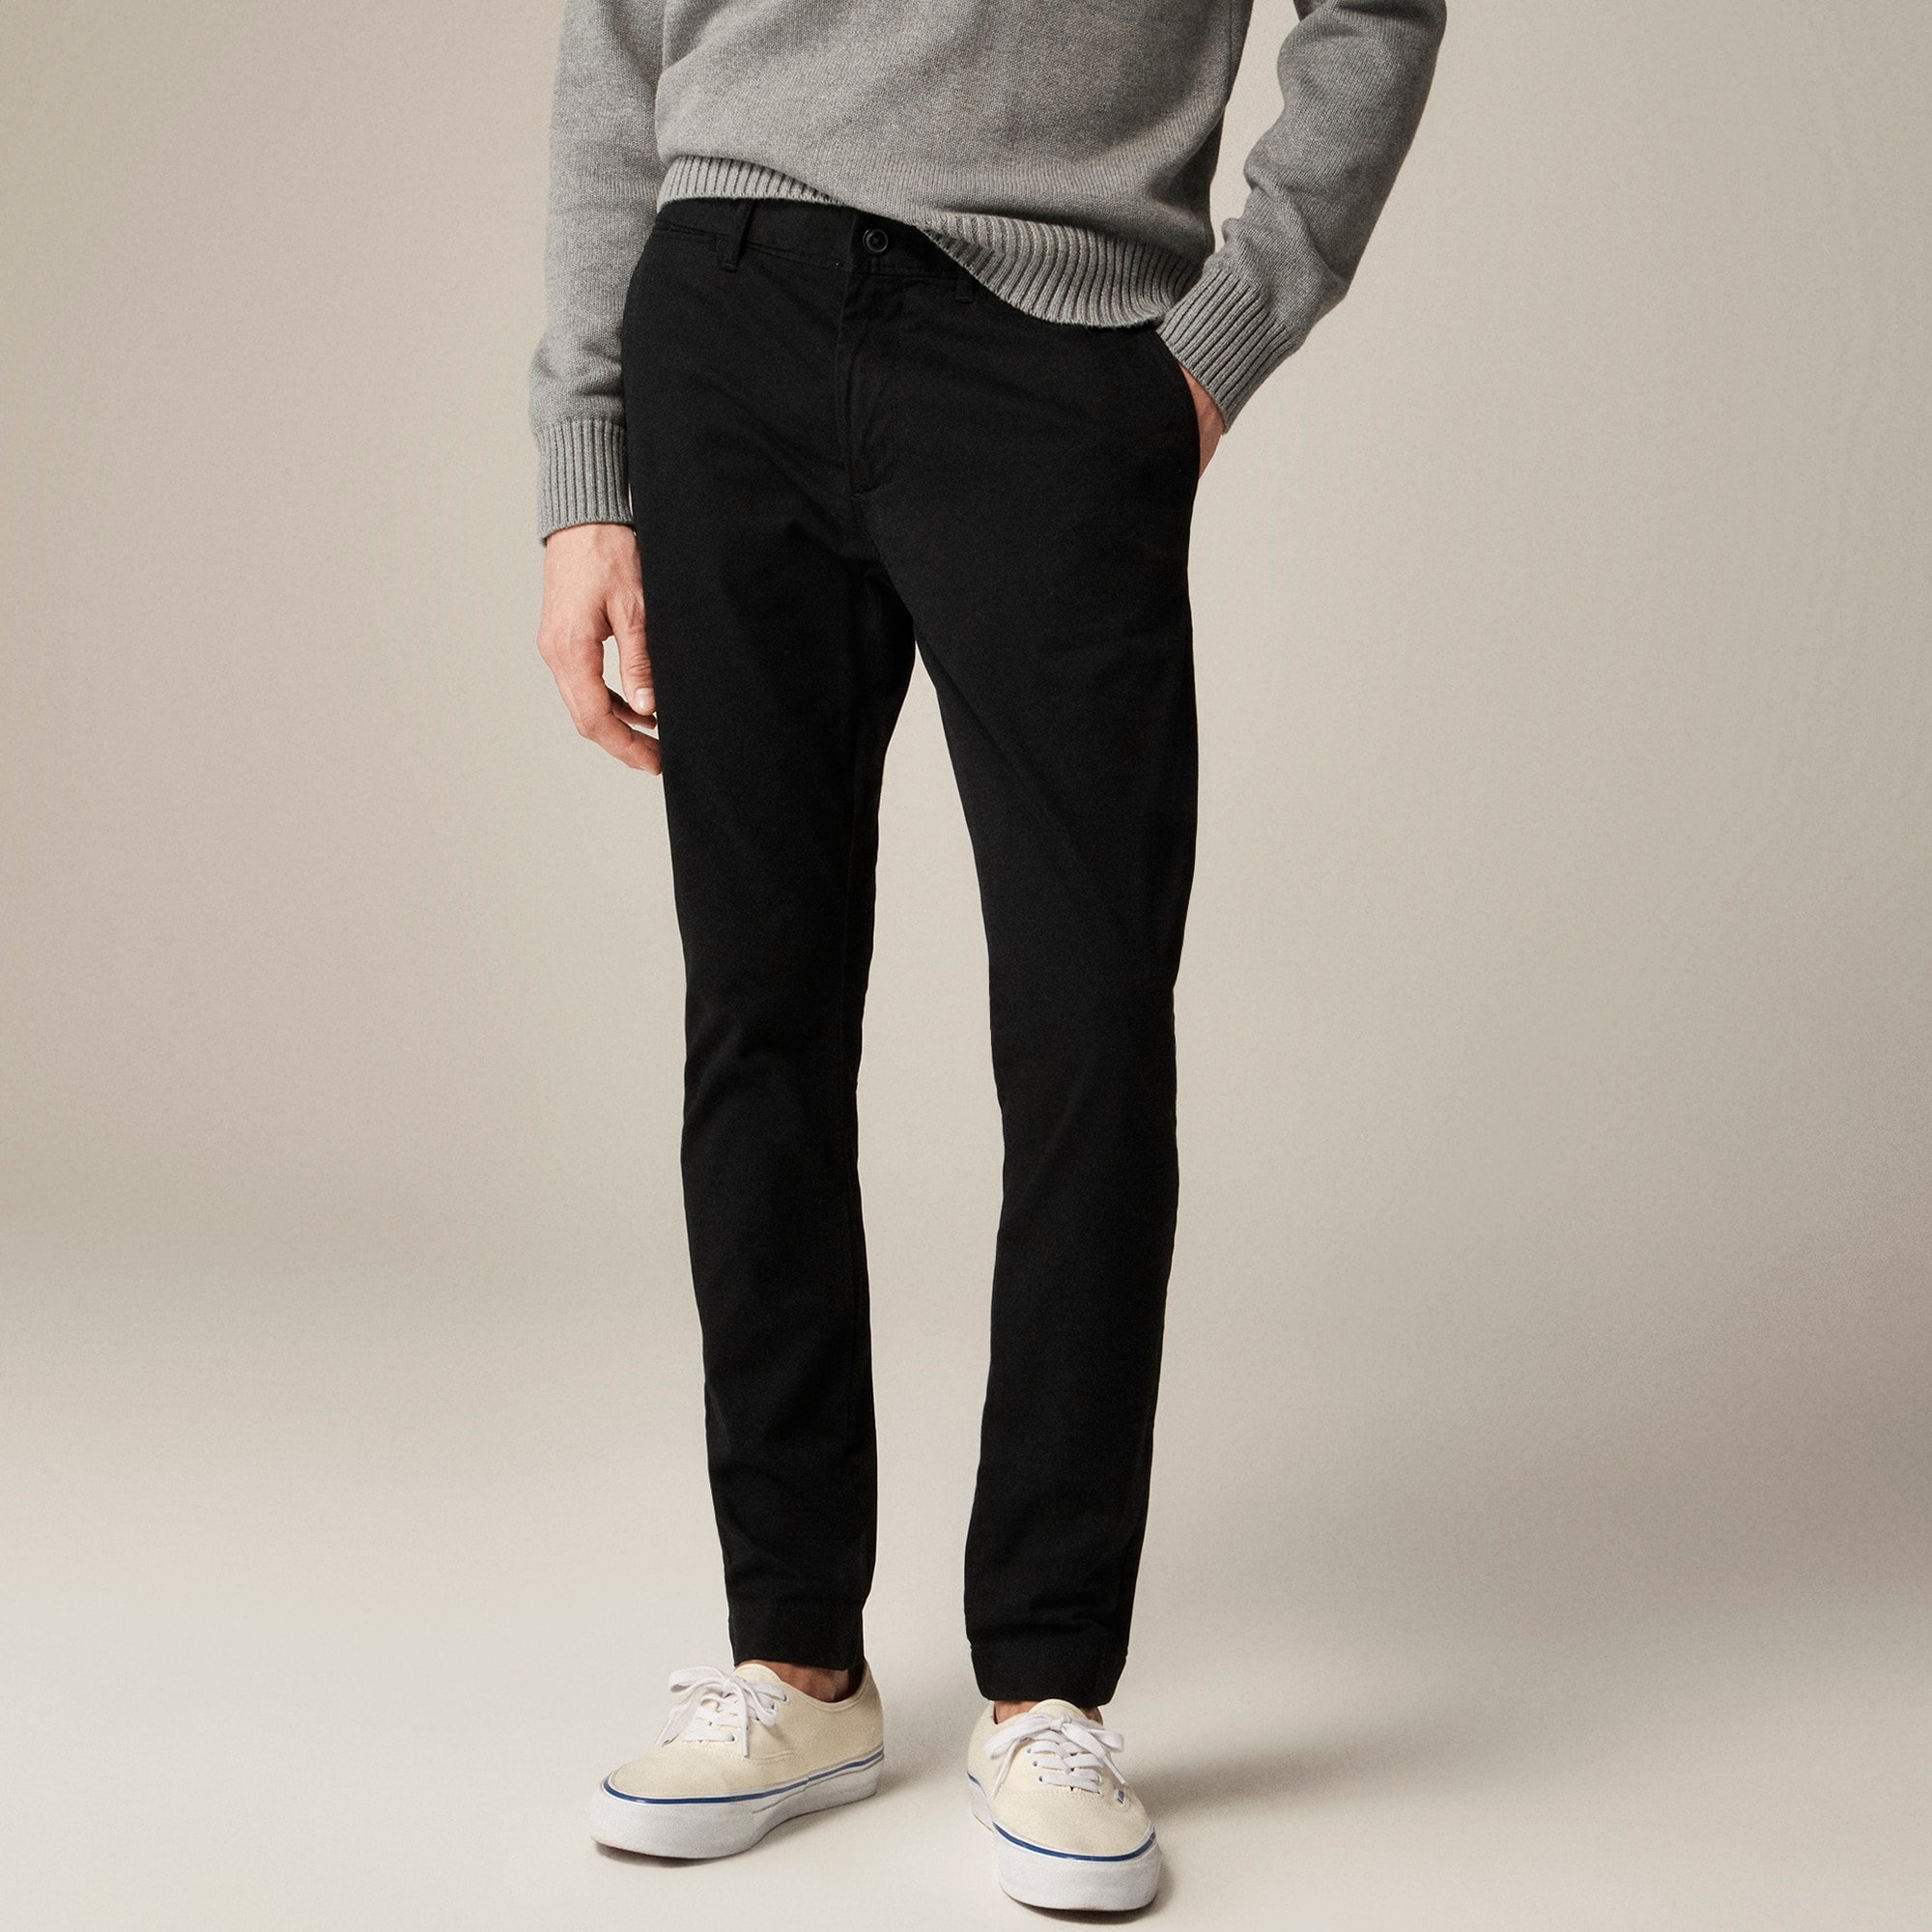  250 skinny-fit pant in stretch chino